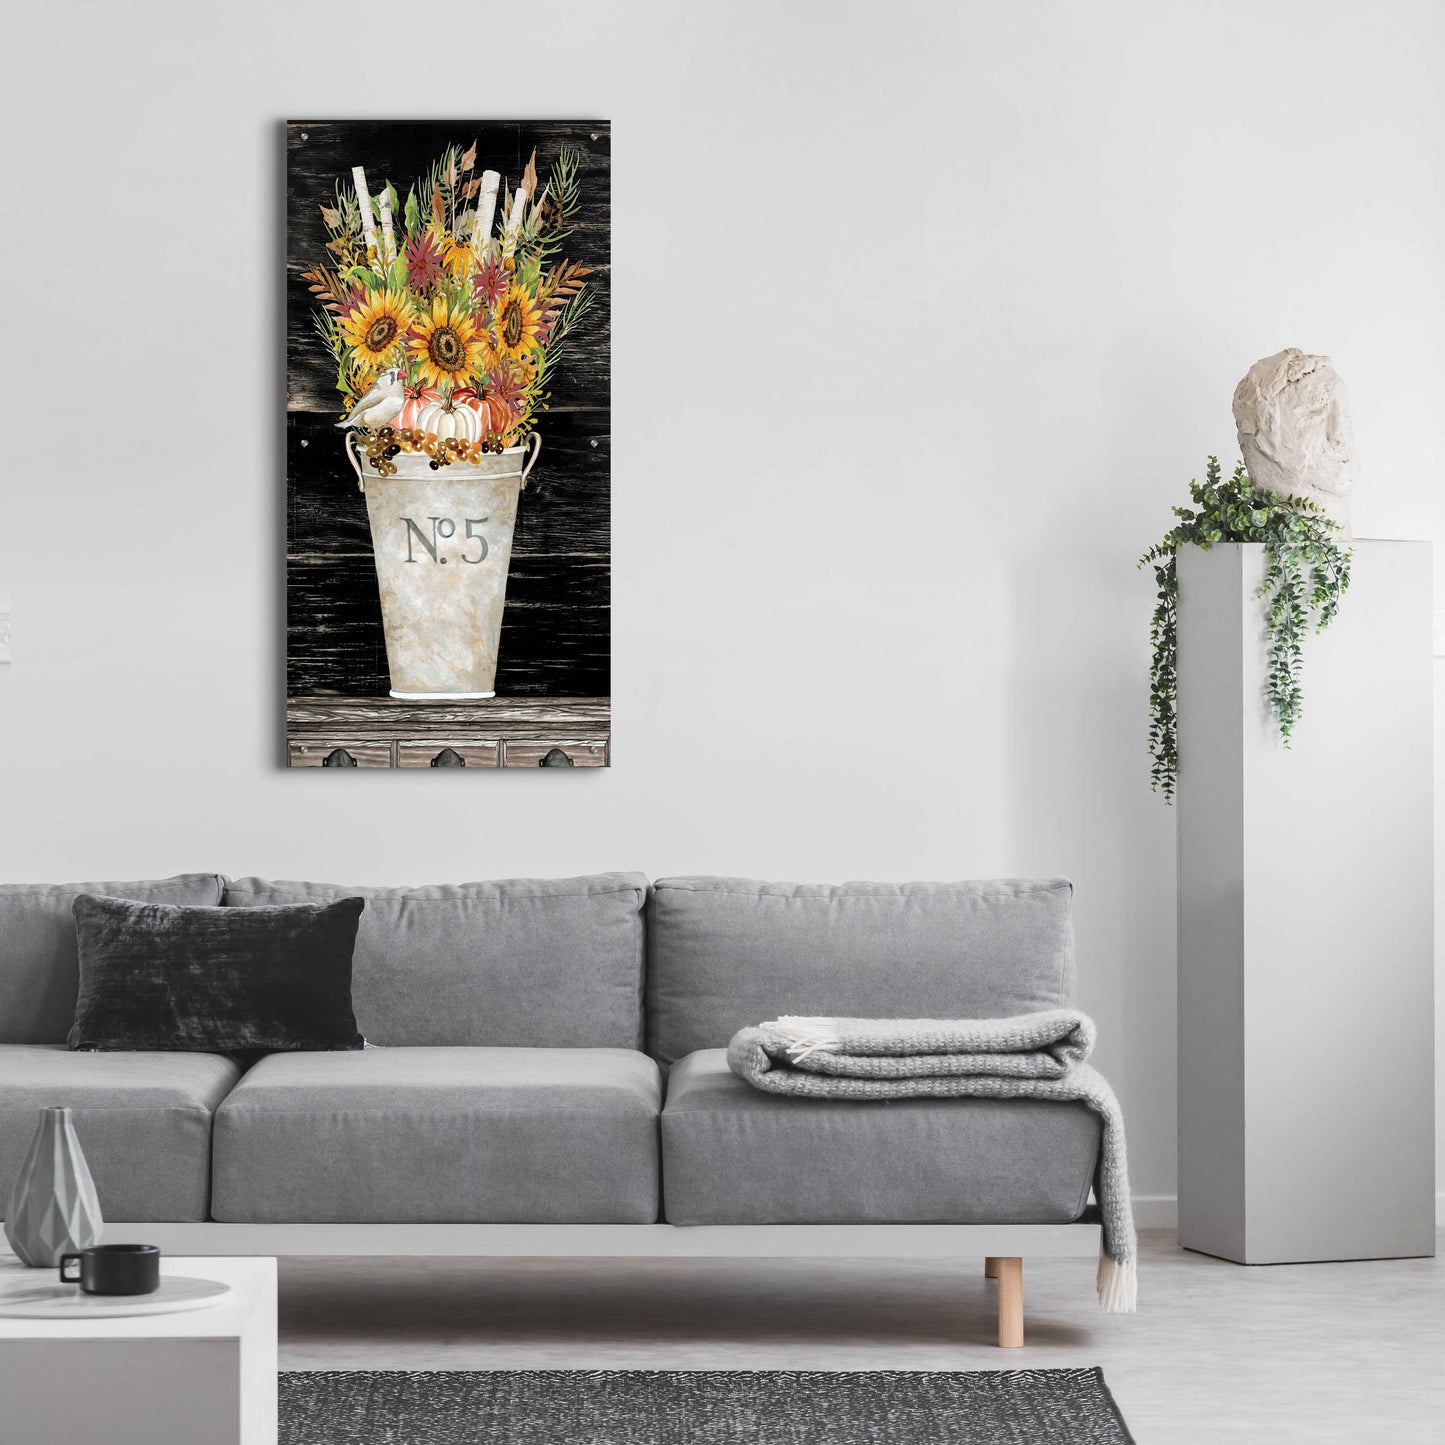 Epic Art 'No. 5 Fall Flowers and Birch 1' by Cindy Jacobs, Acrylic Glass Wall Art,24x48